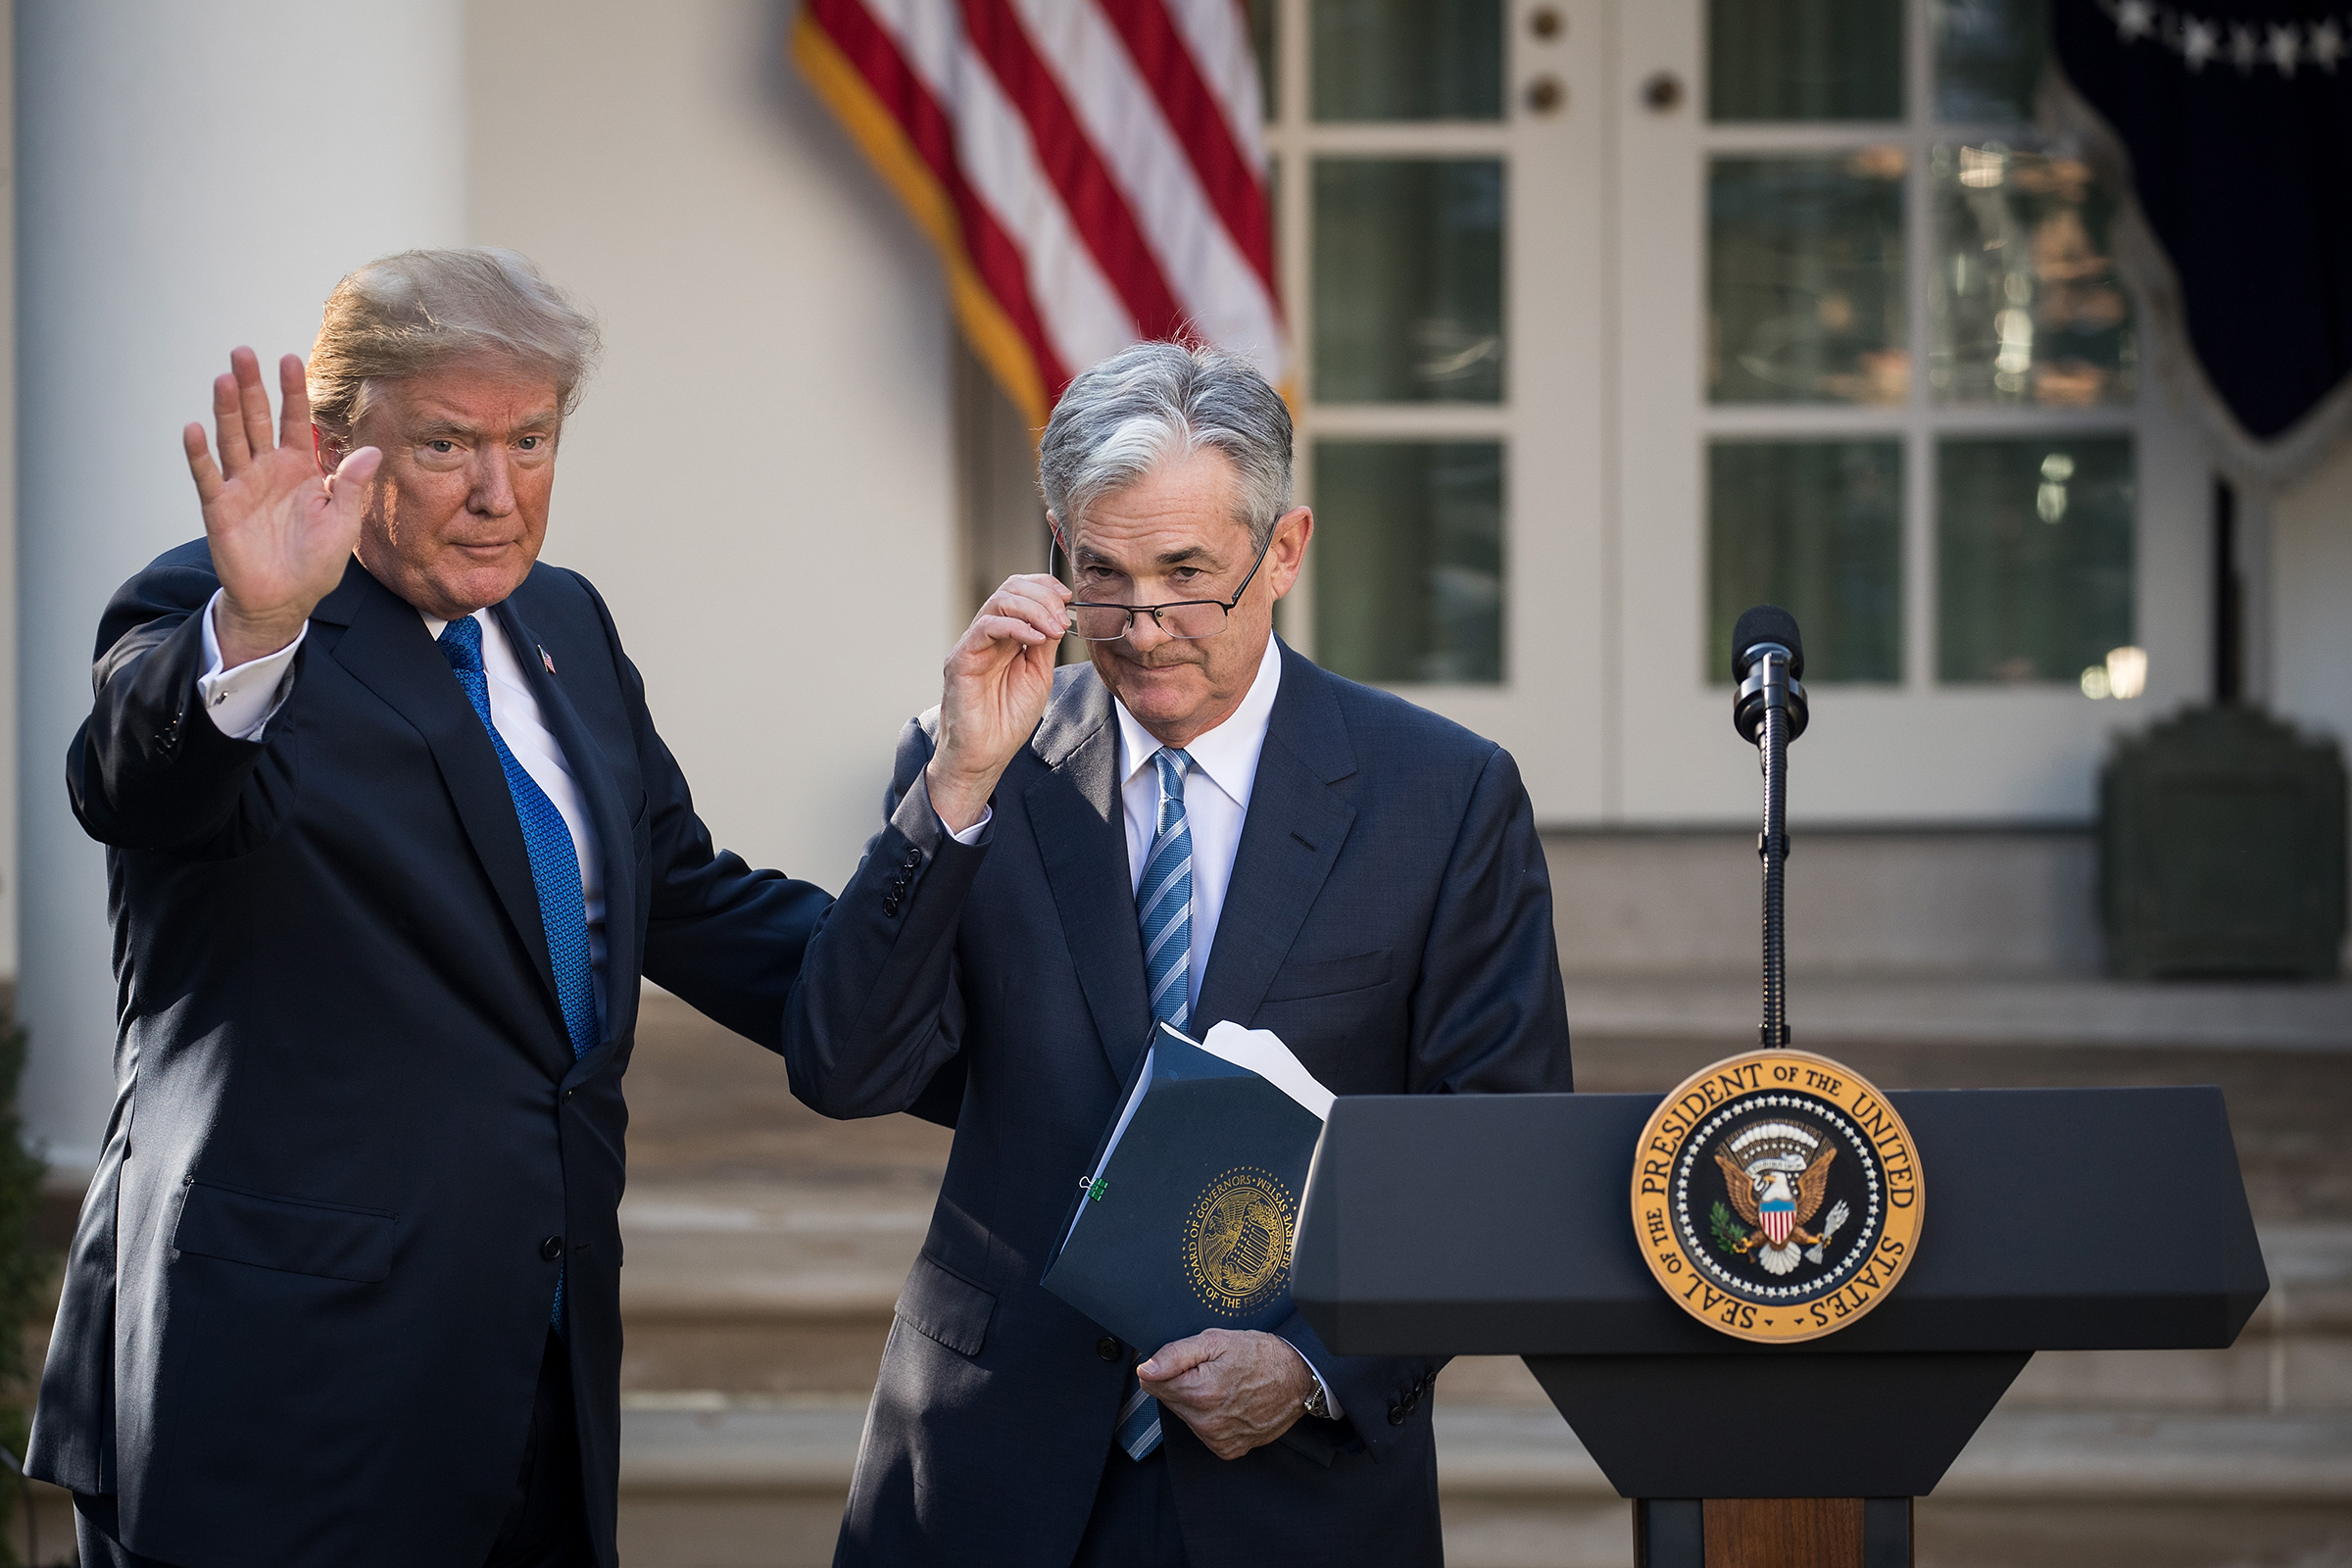 Trump introduces Powell as his nominee for chairman of the Fed in 2017